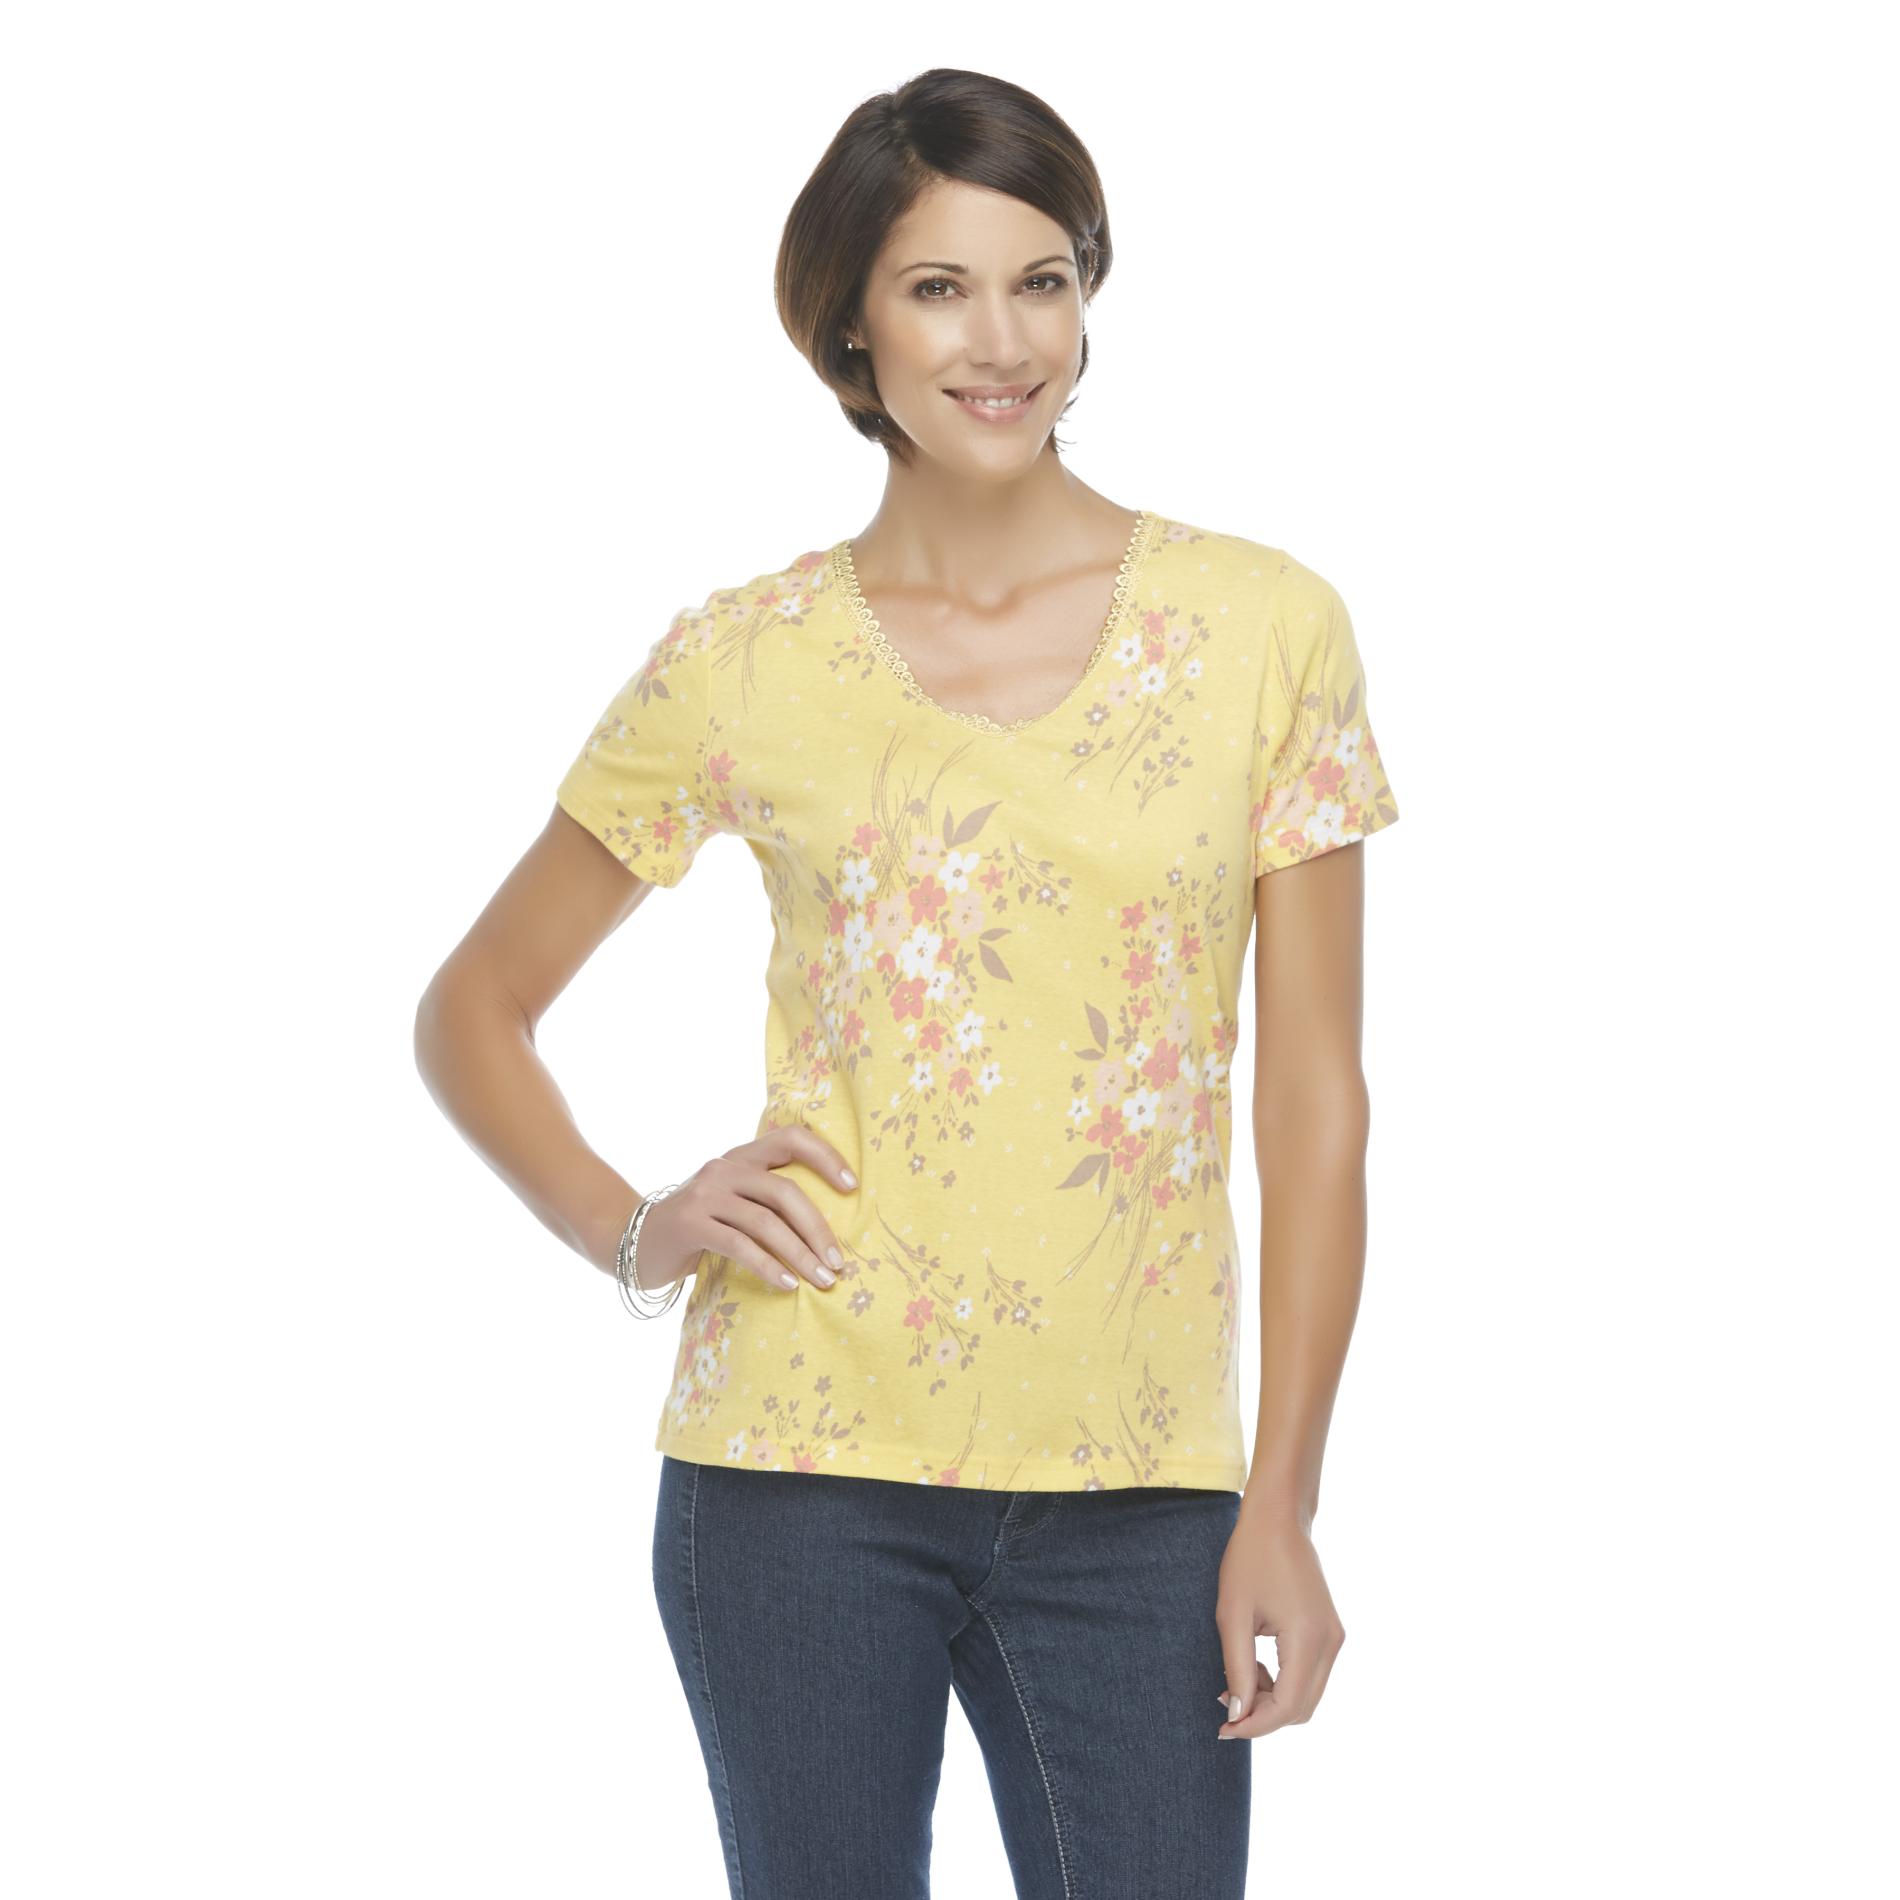 Basic Editions Women's Lace V-Neck T-Shirt - Floral